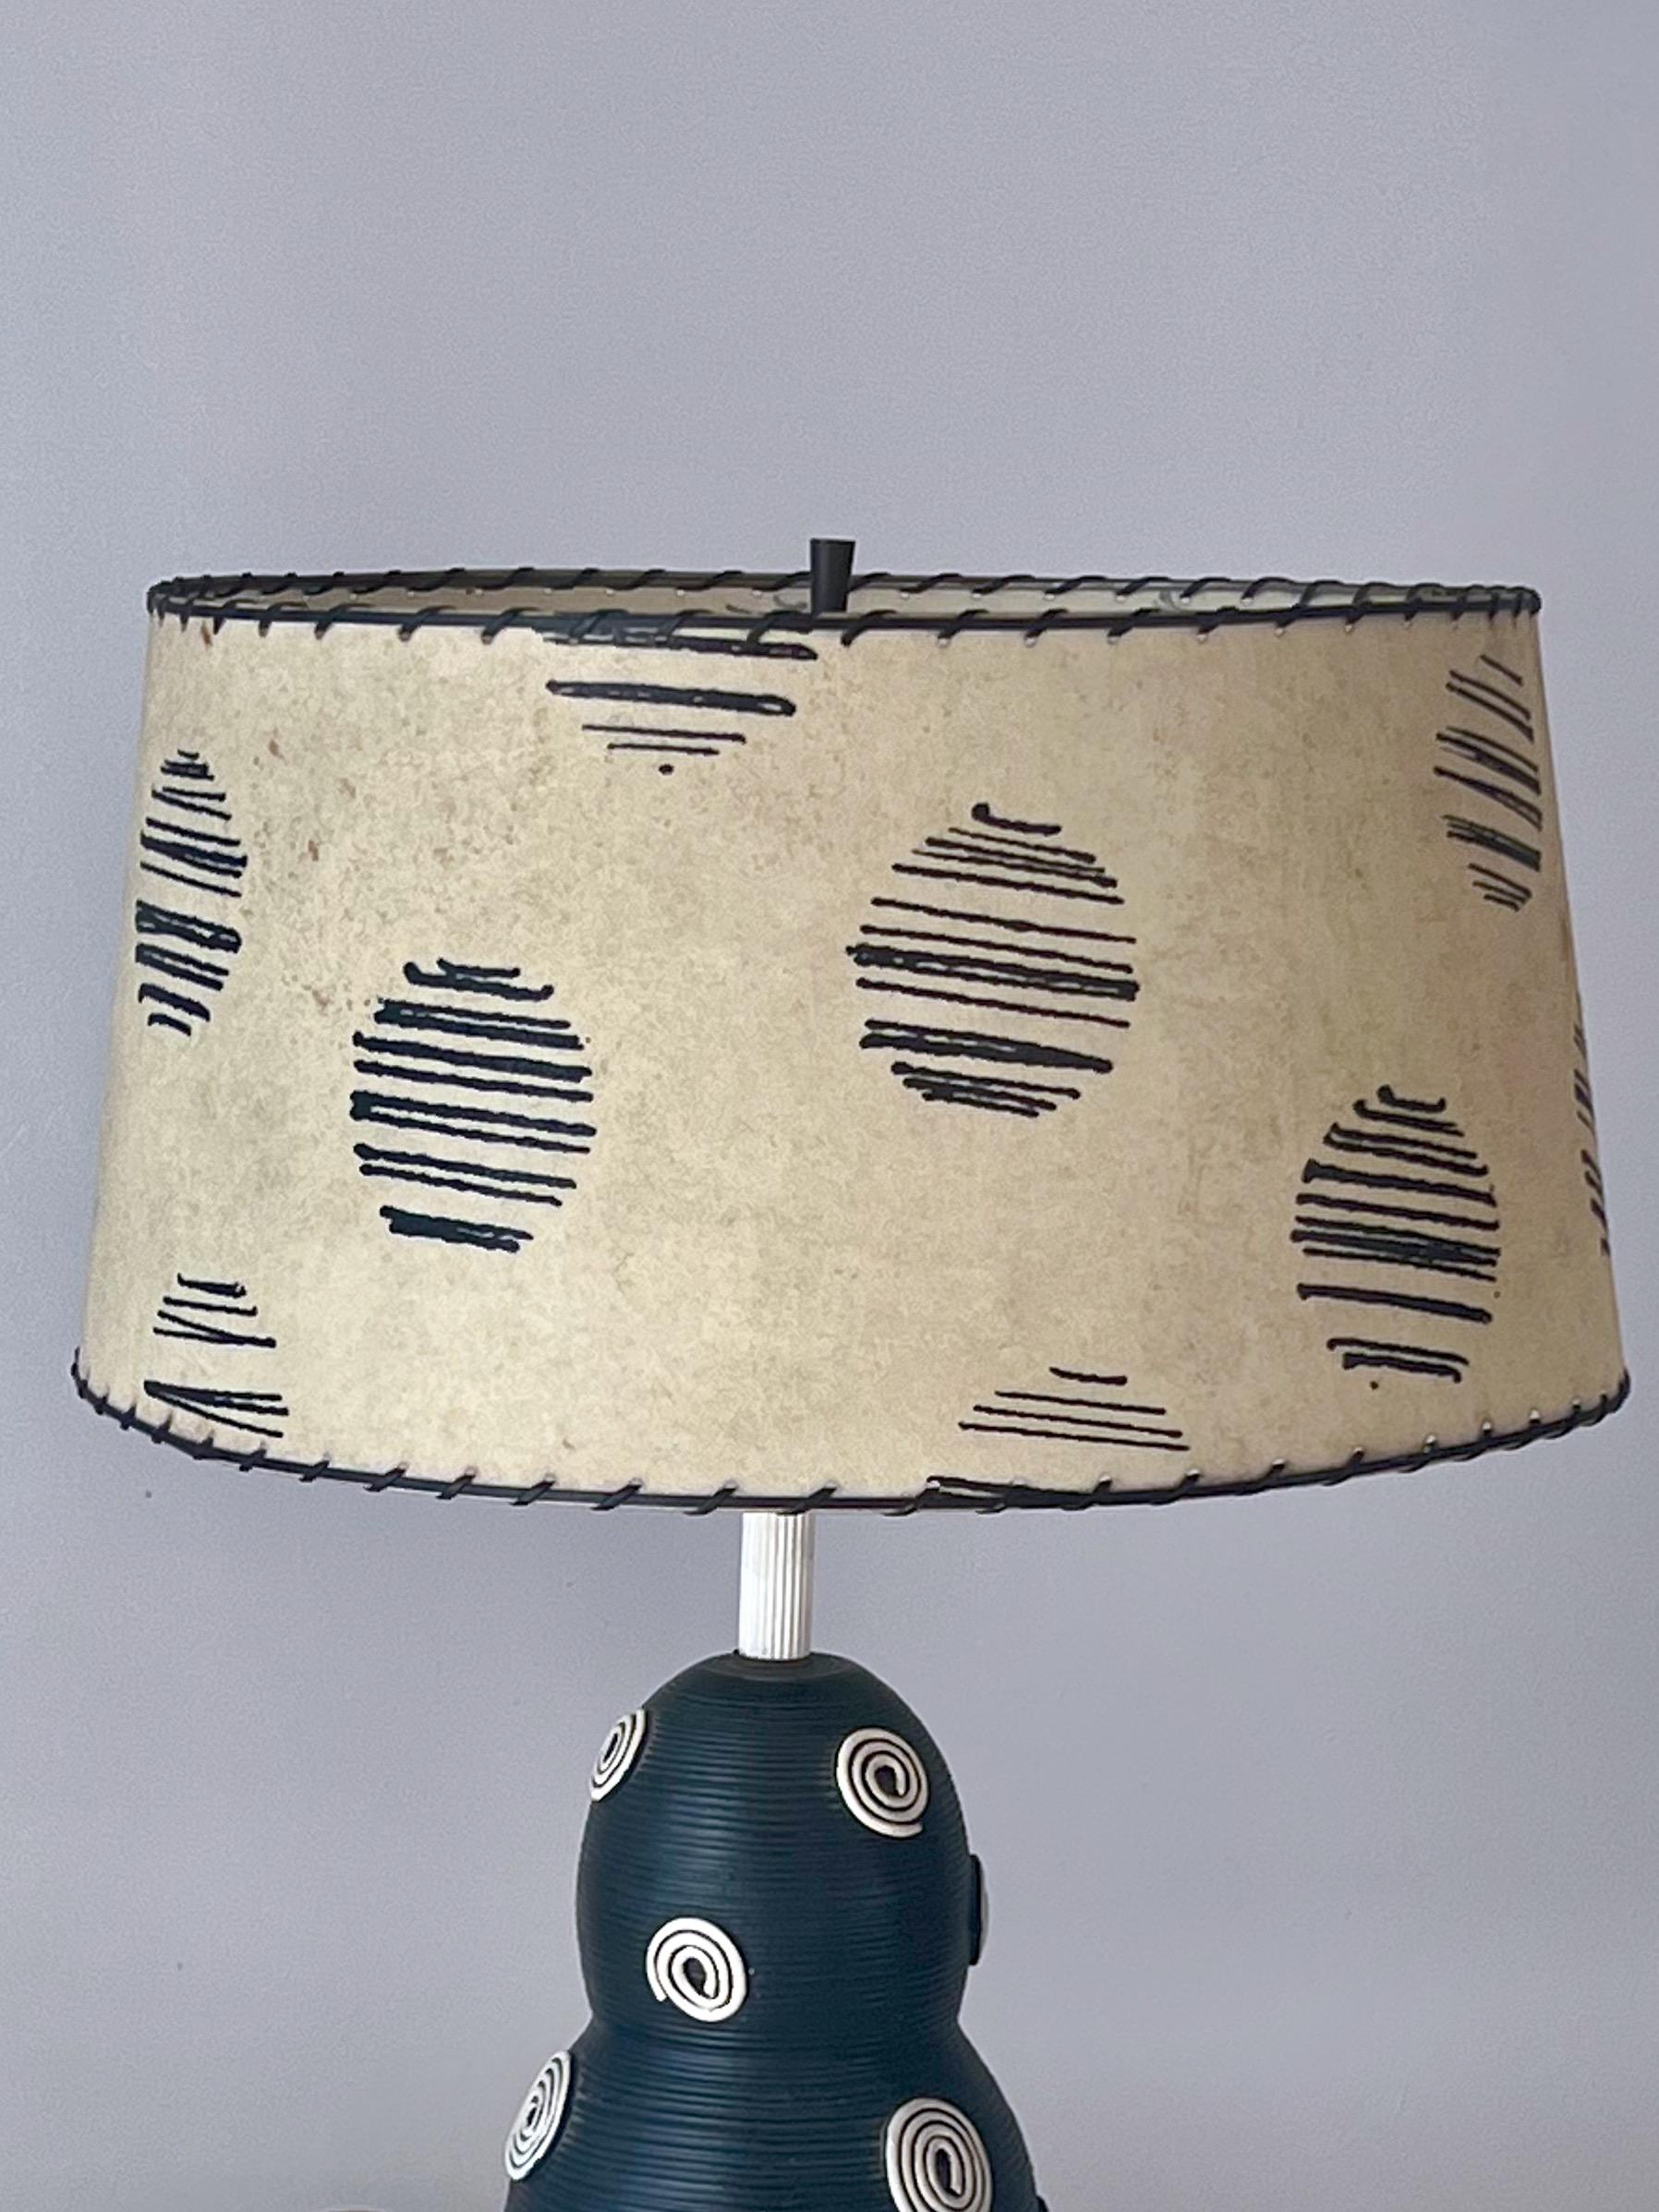 Utterly unique table lamp with custom lampshade. Protruding swirl pattern throughout, along with ridges to the ceramic. Tripod metal base supporting what is a very heavy piece. 